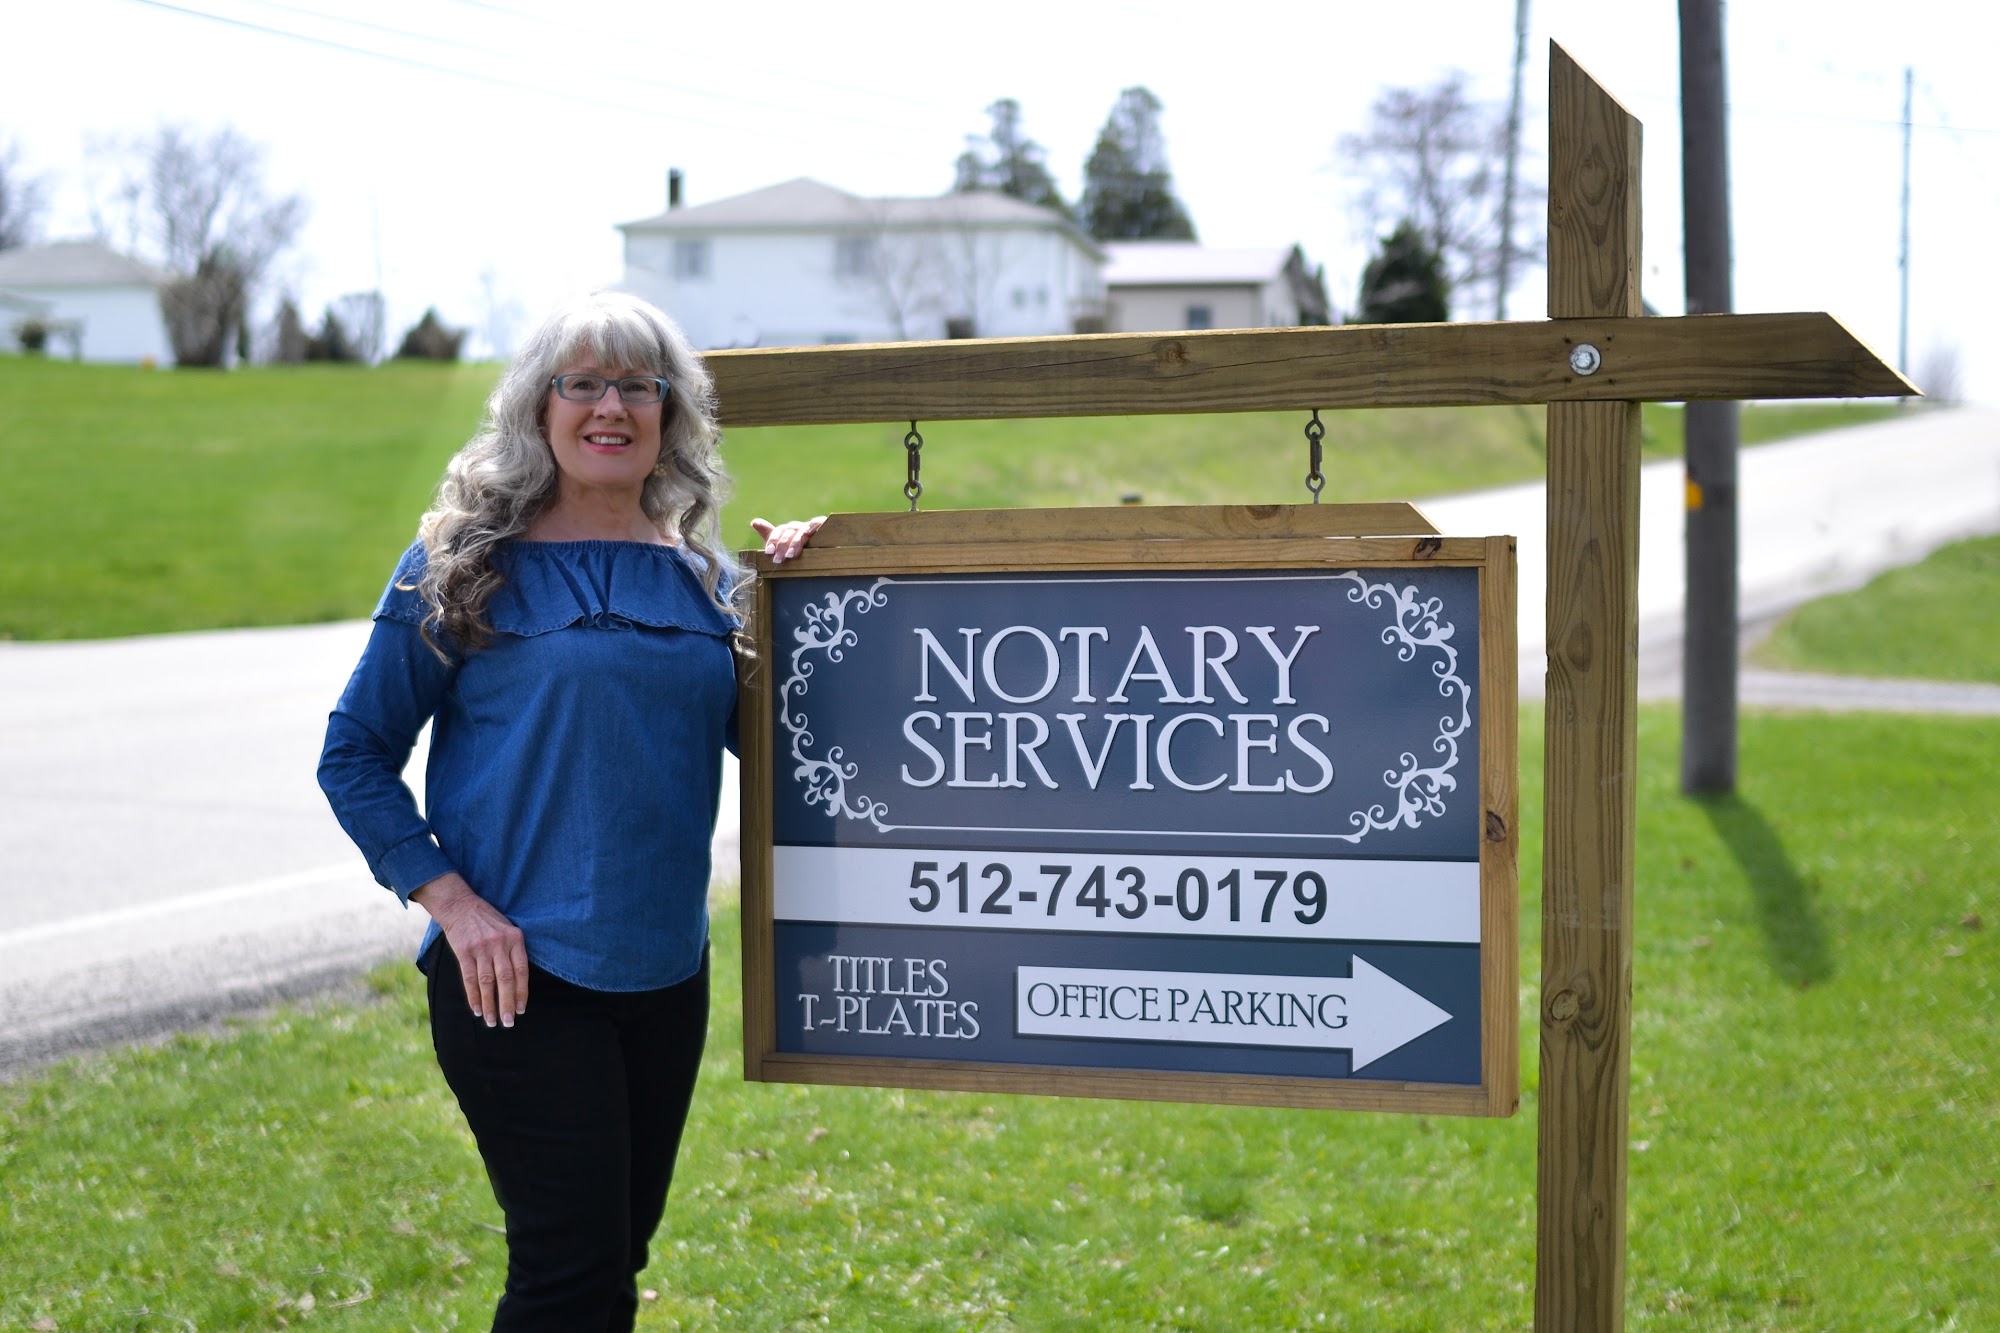 Donna Krall dba D.K.'s Notary, Titles & Tags 12130 PA-56 East, Armagh Pennsylvania 15920